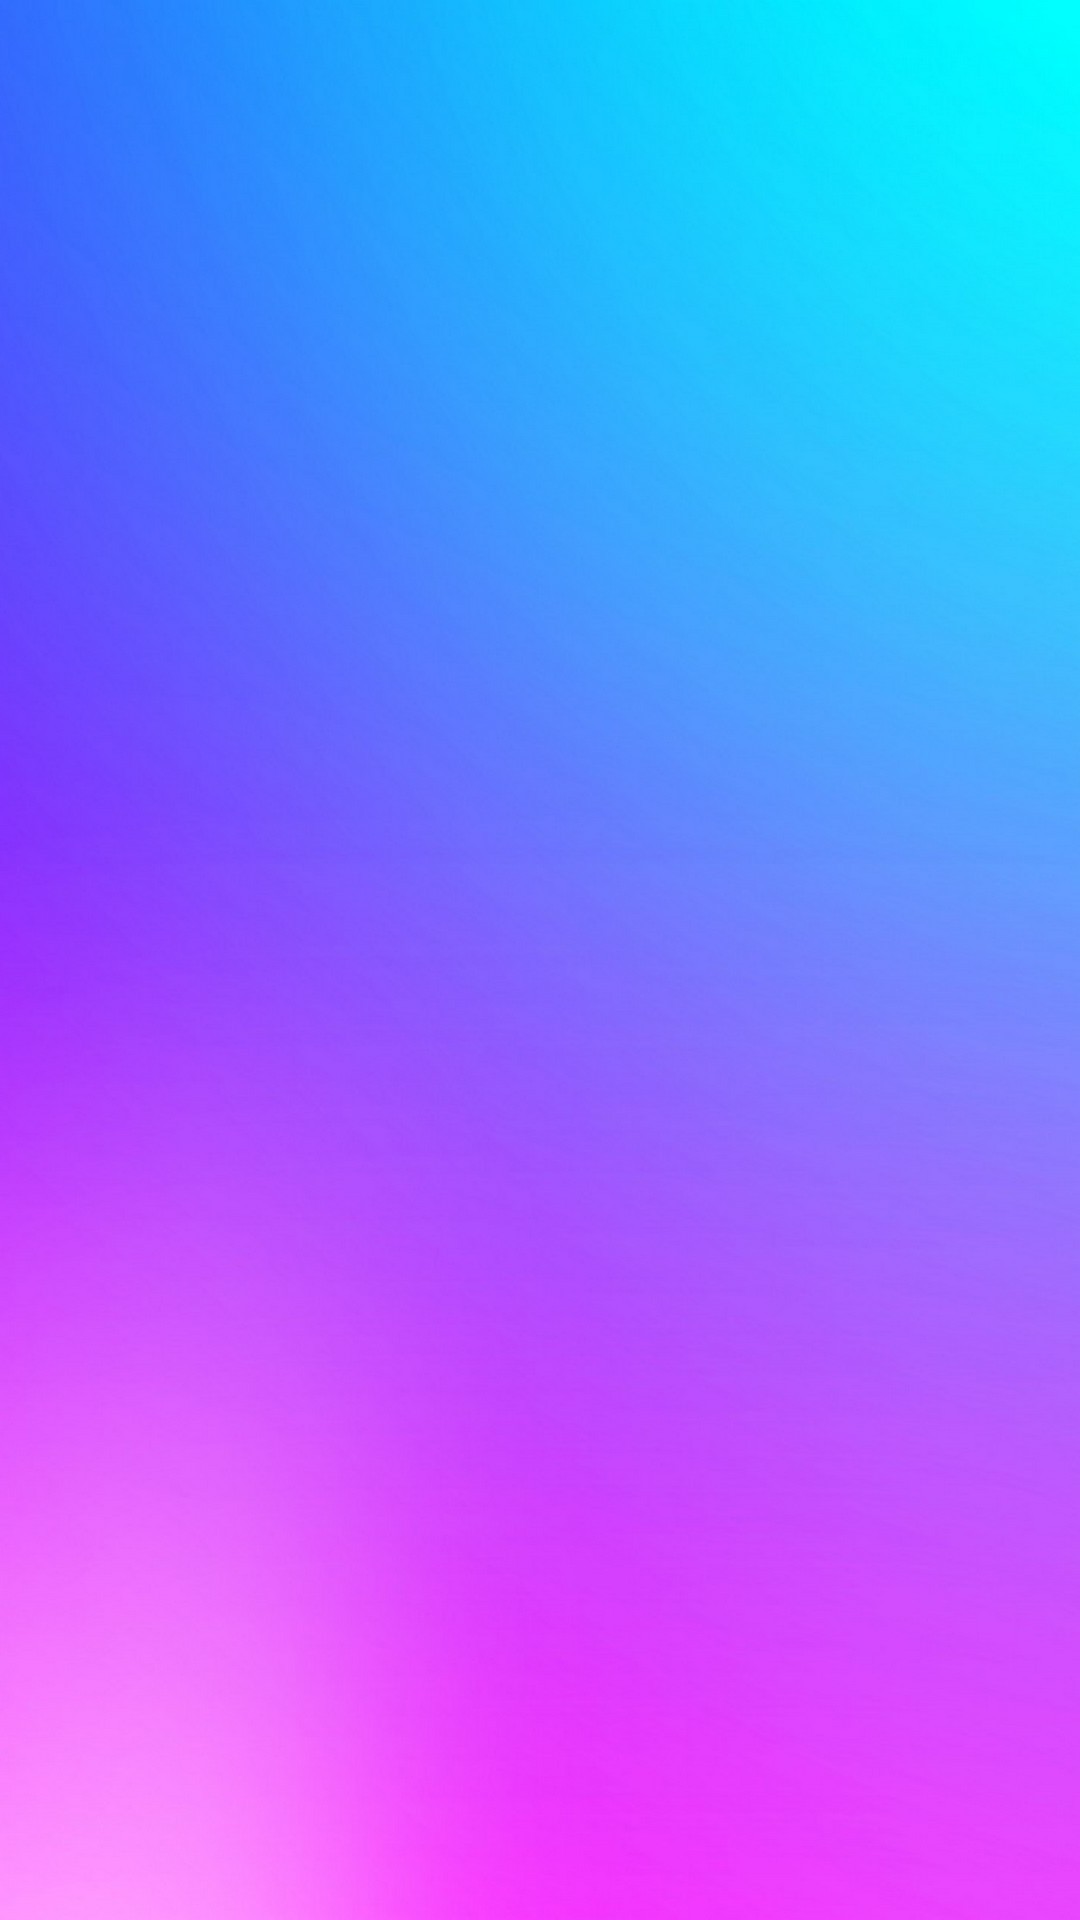 Android Wallpaper Gradient With high-resolution 1080X1920 pixel. You can use this wallpaper for your Android backgrounds, Tablet, Samsung Screensavers, Mobile Phone Lock Screen and another Smartphones device